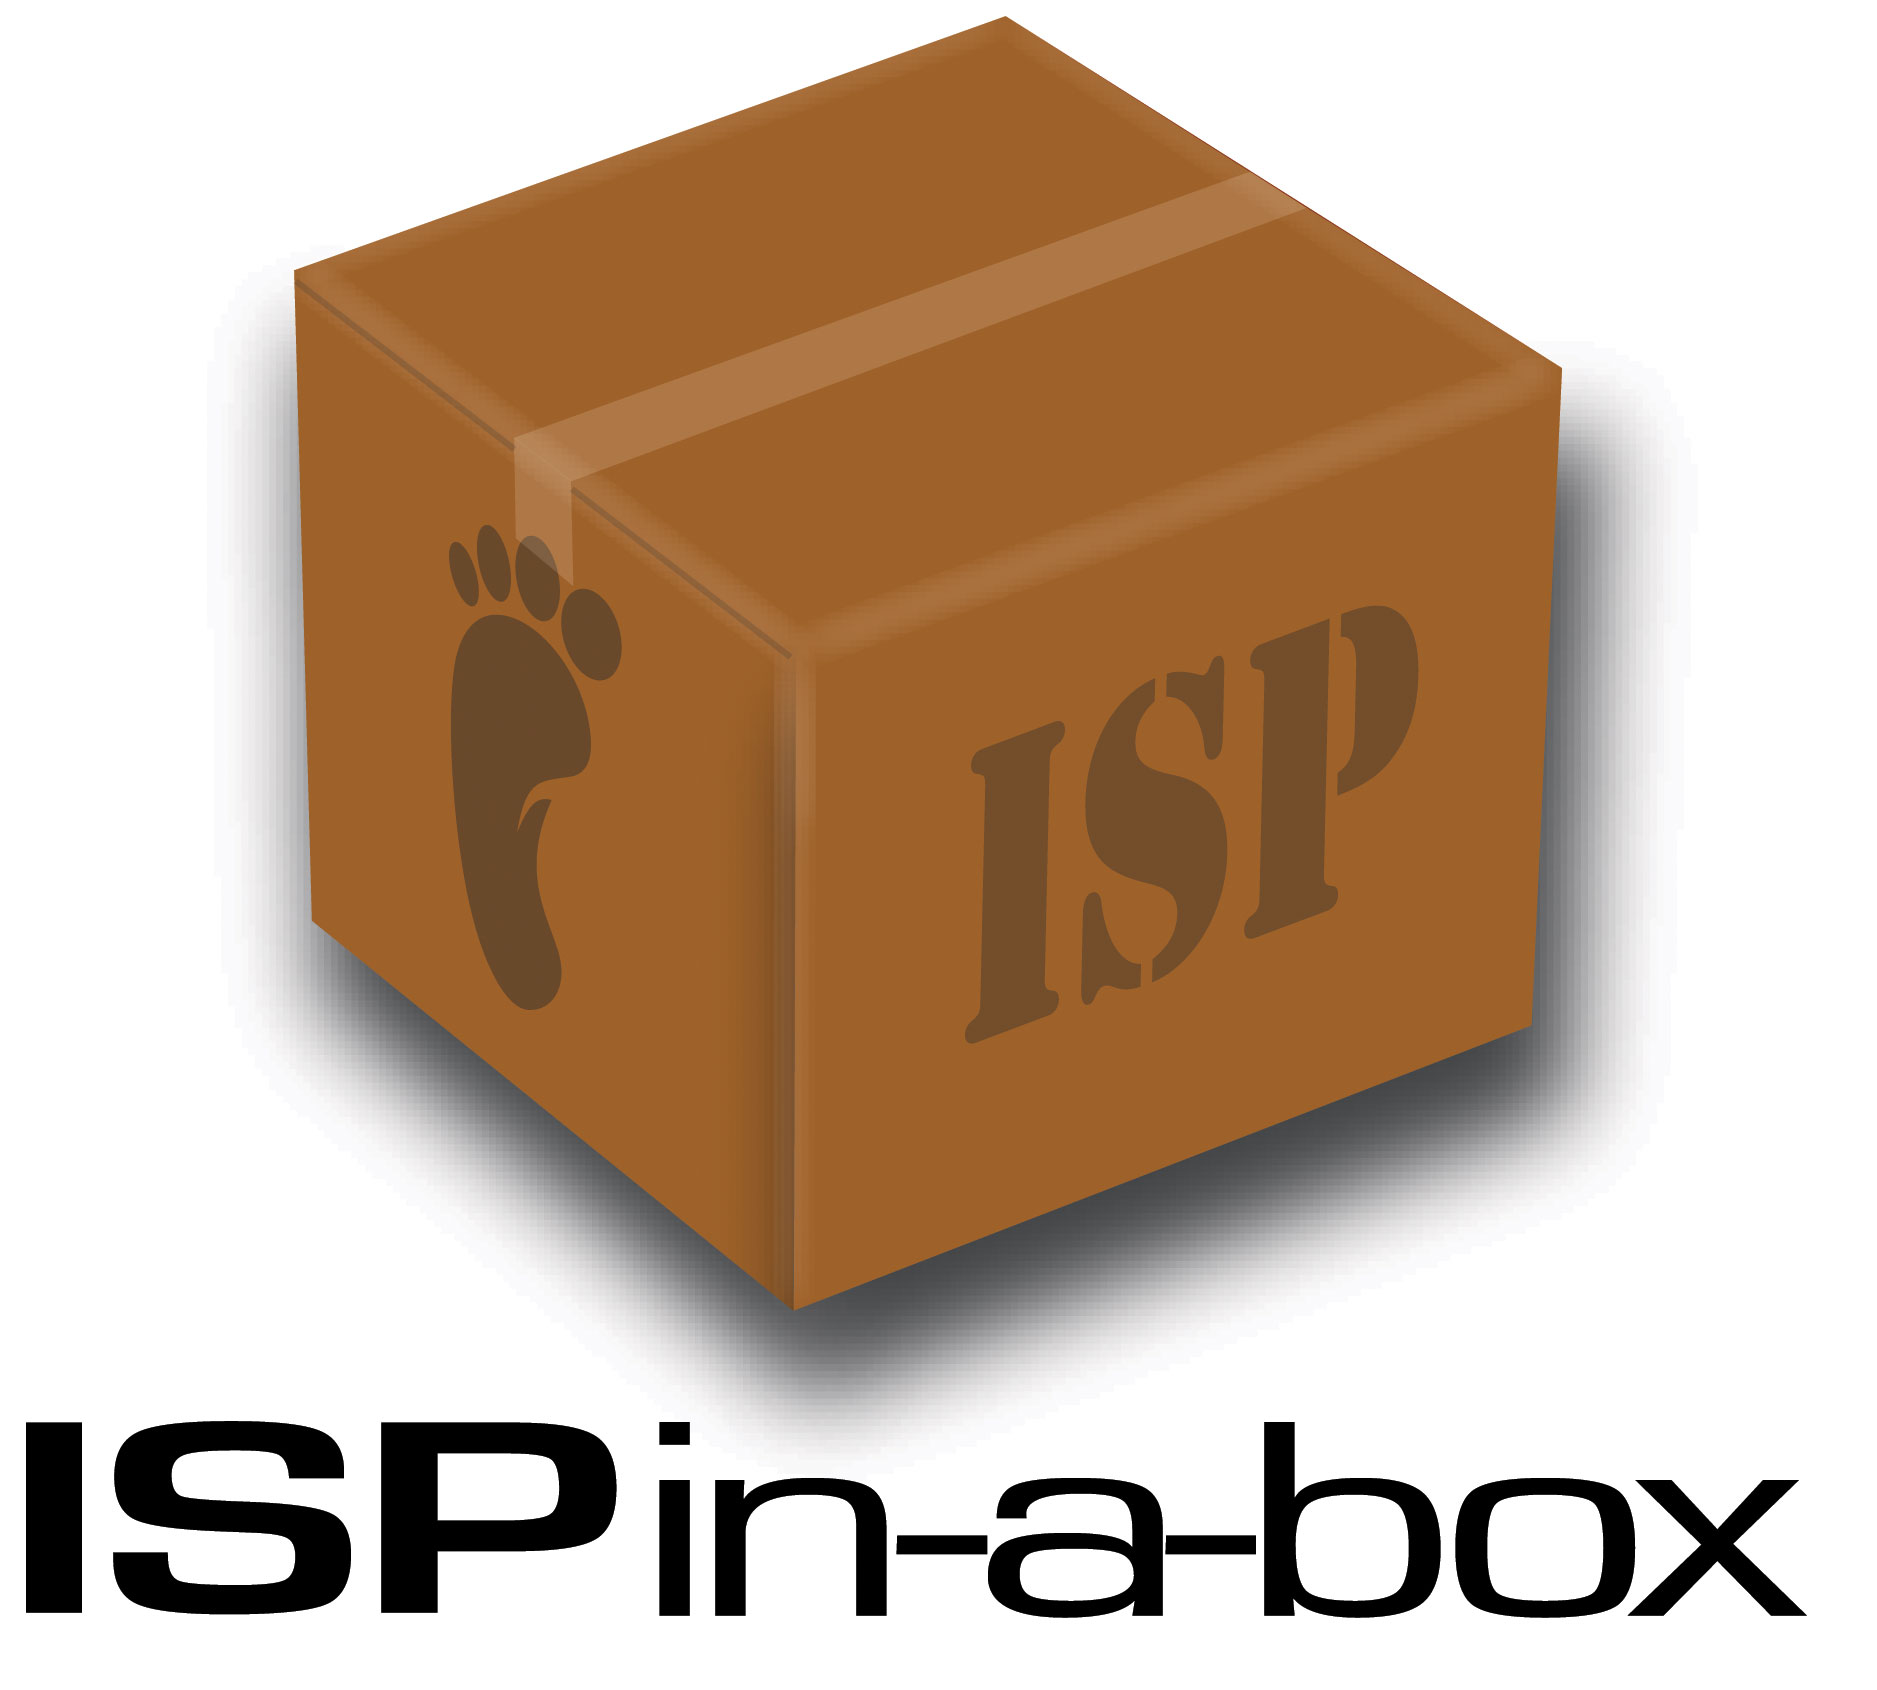 ISPIN. What does this box